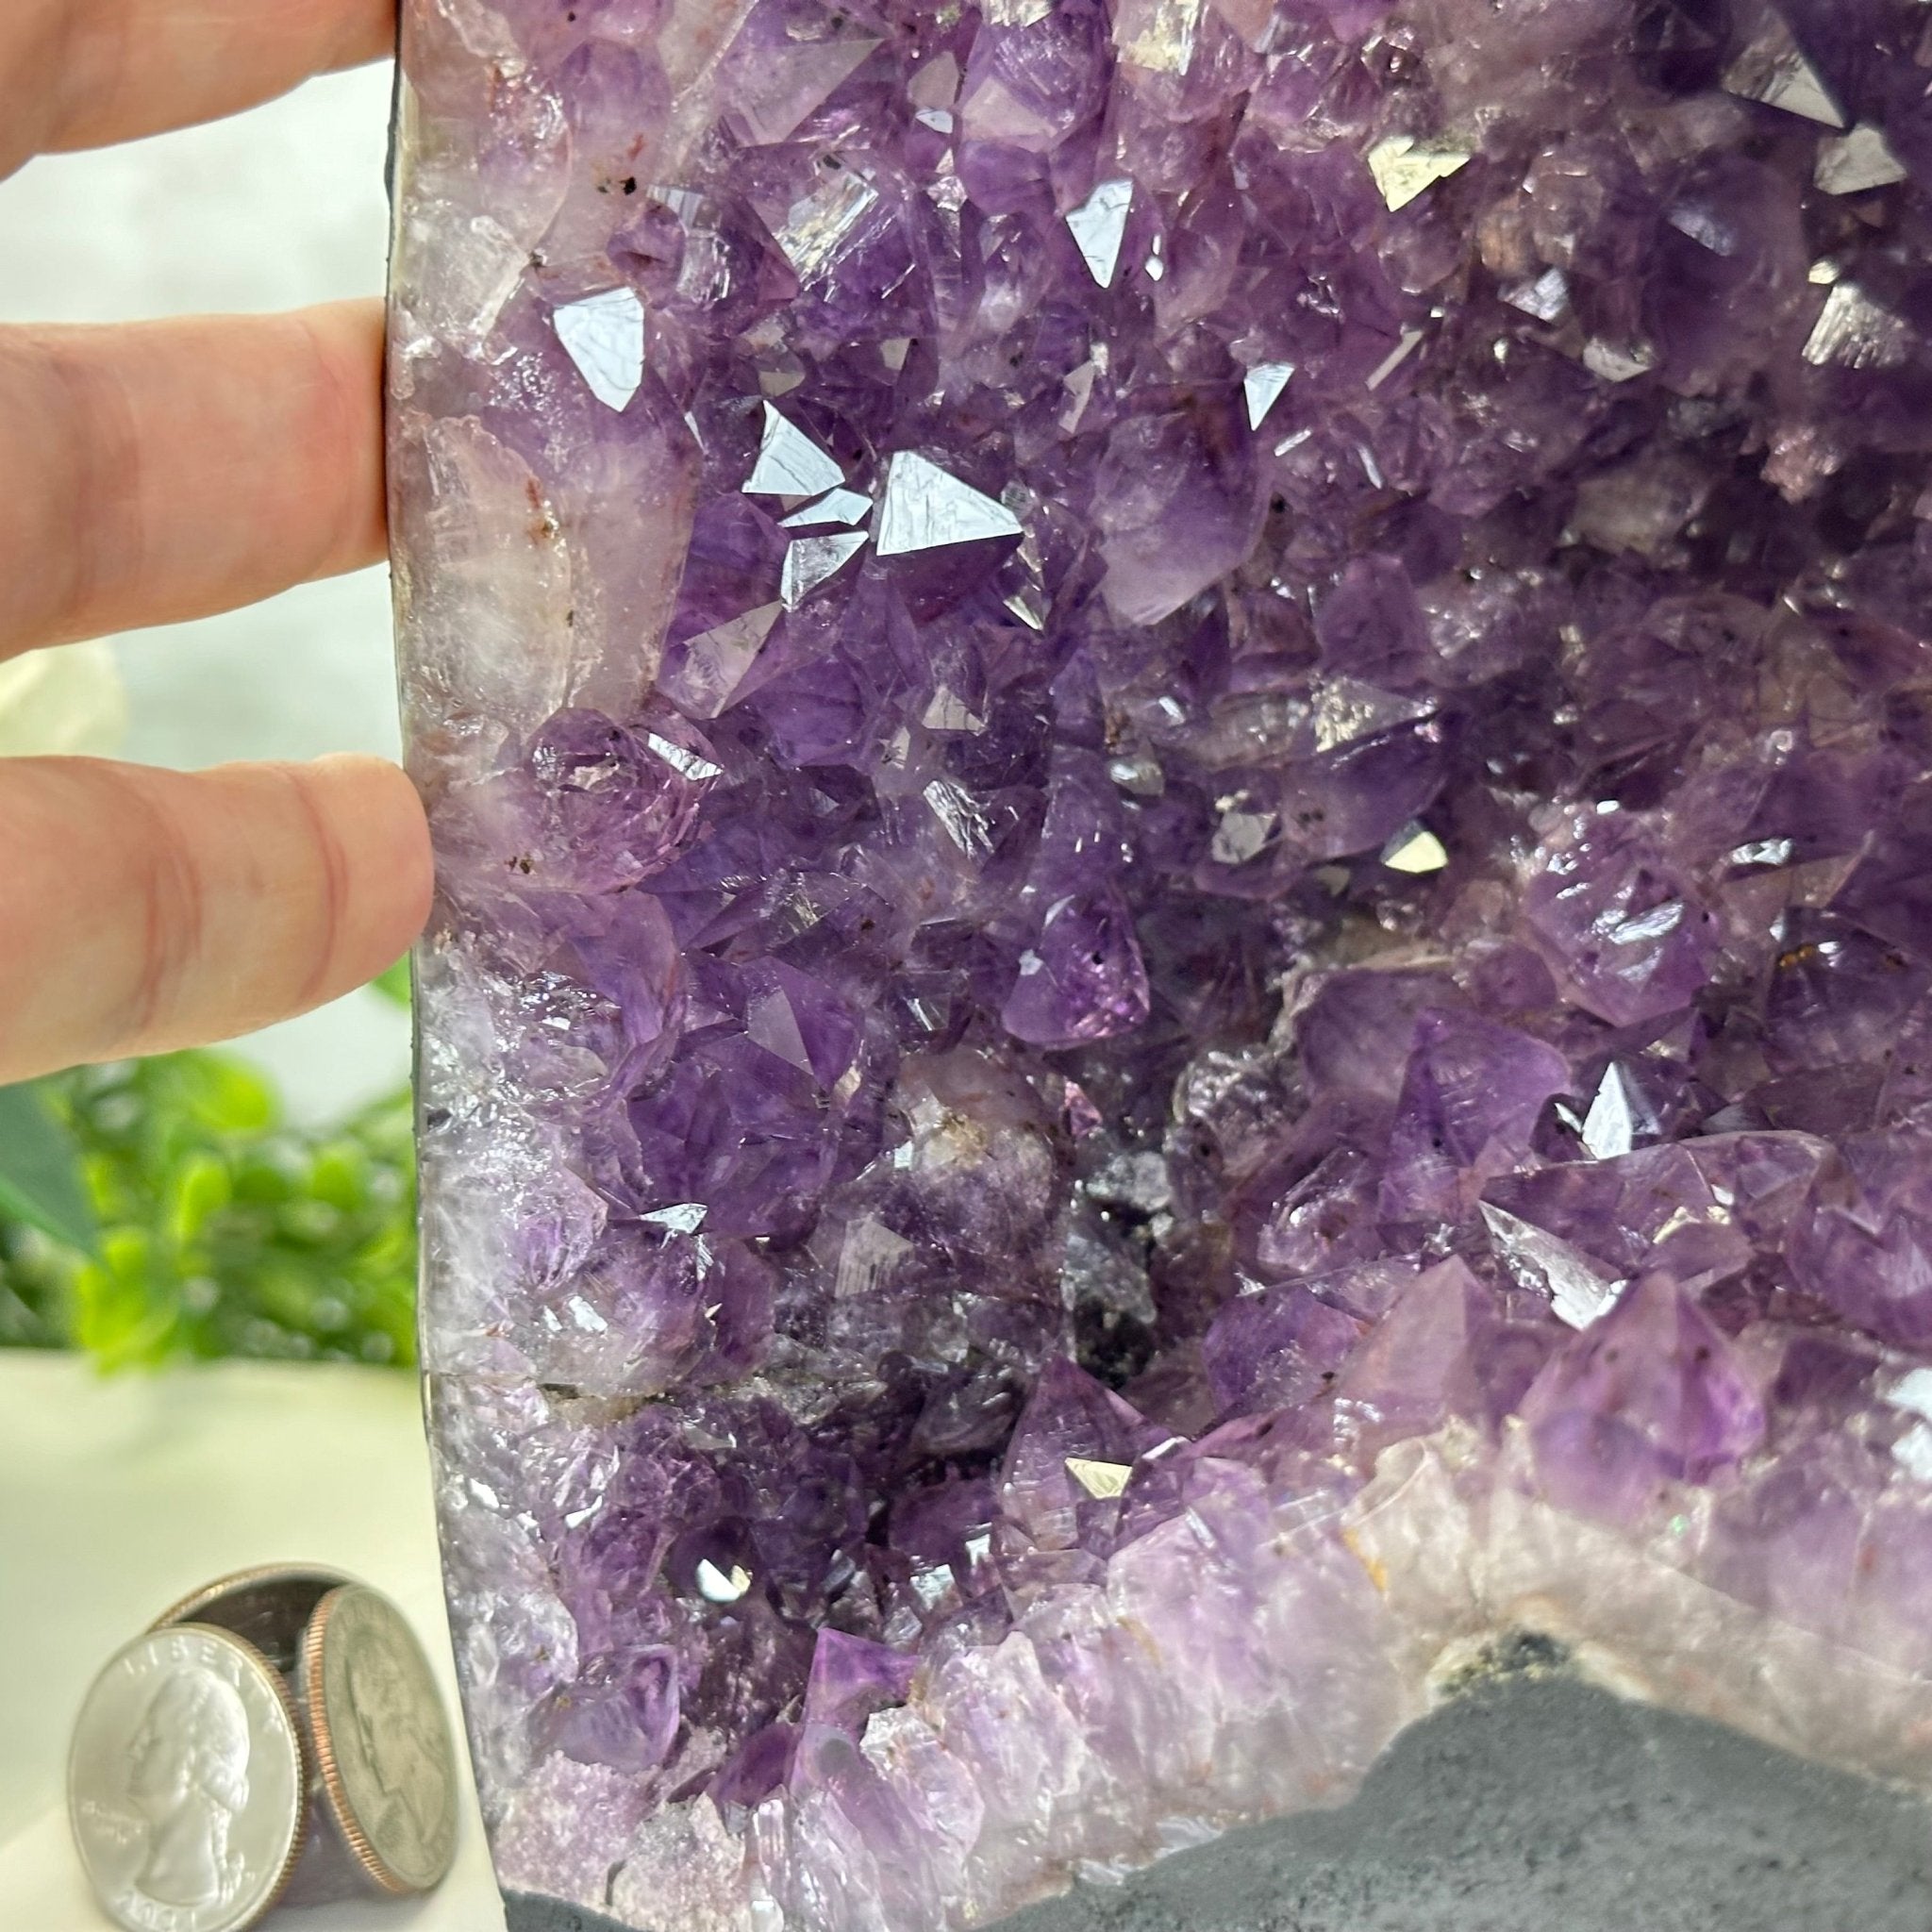 Quality Brazilian Amethyst Cathedral, 17.6 lbs & 11.8" Tall, #5601 - 1376 - Brazil GemsBrazil GemsQuality Brazilian Amethyst Cathedral, 17.6 lbs & 11.8" Tall, #5601 - 1376Cathedrals5601 - 1376